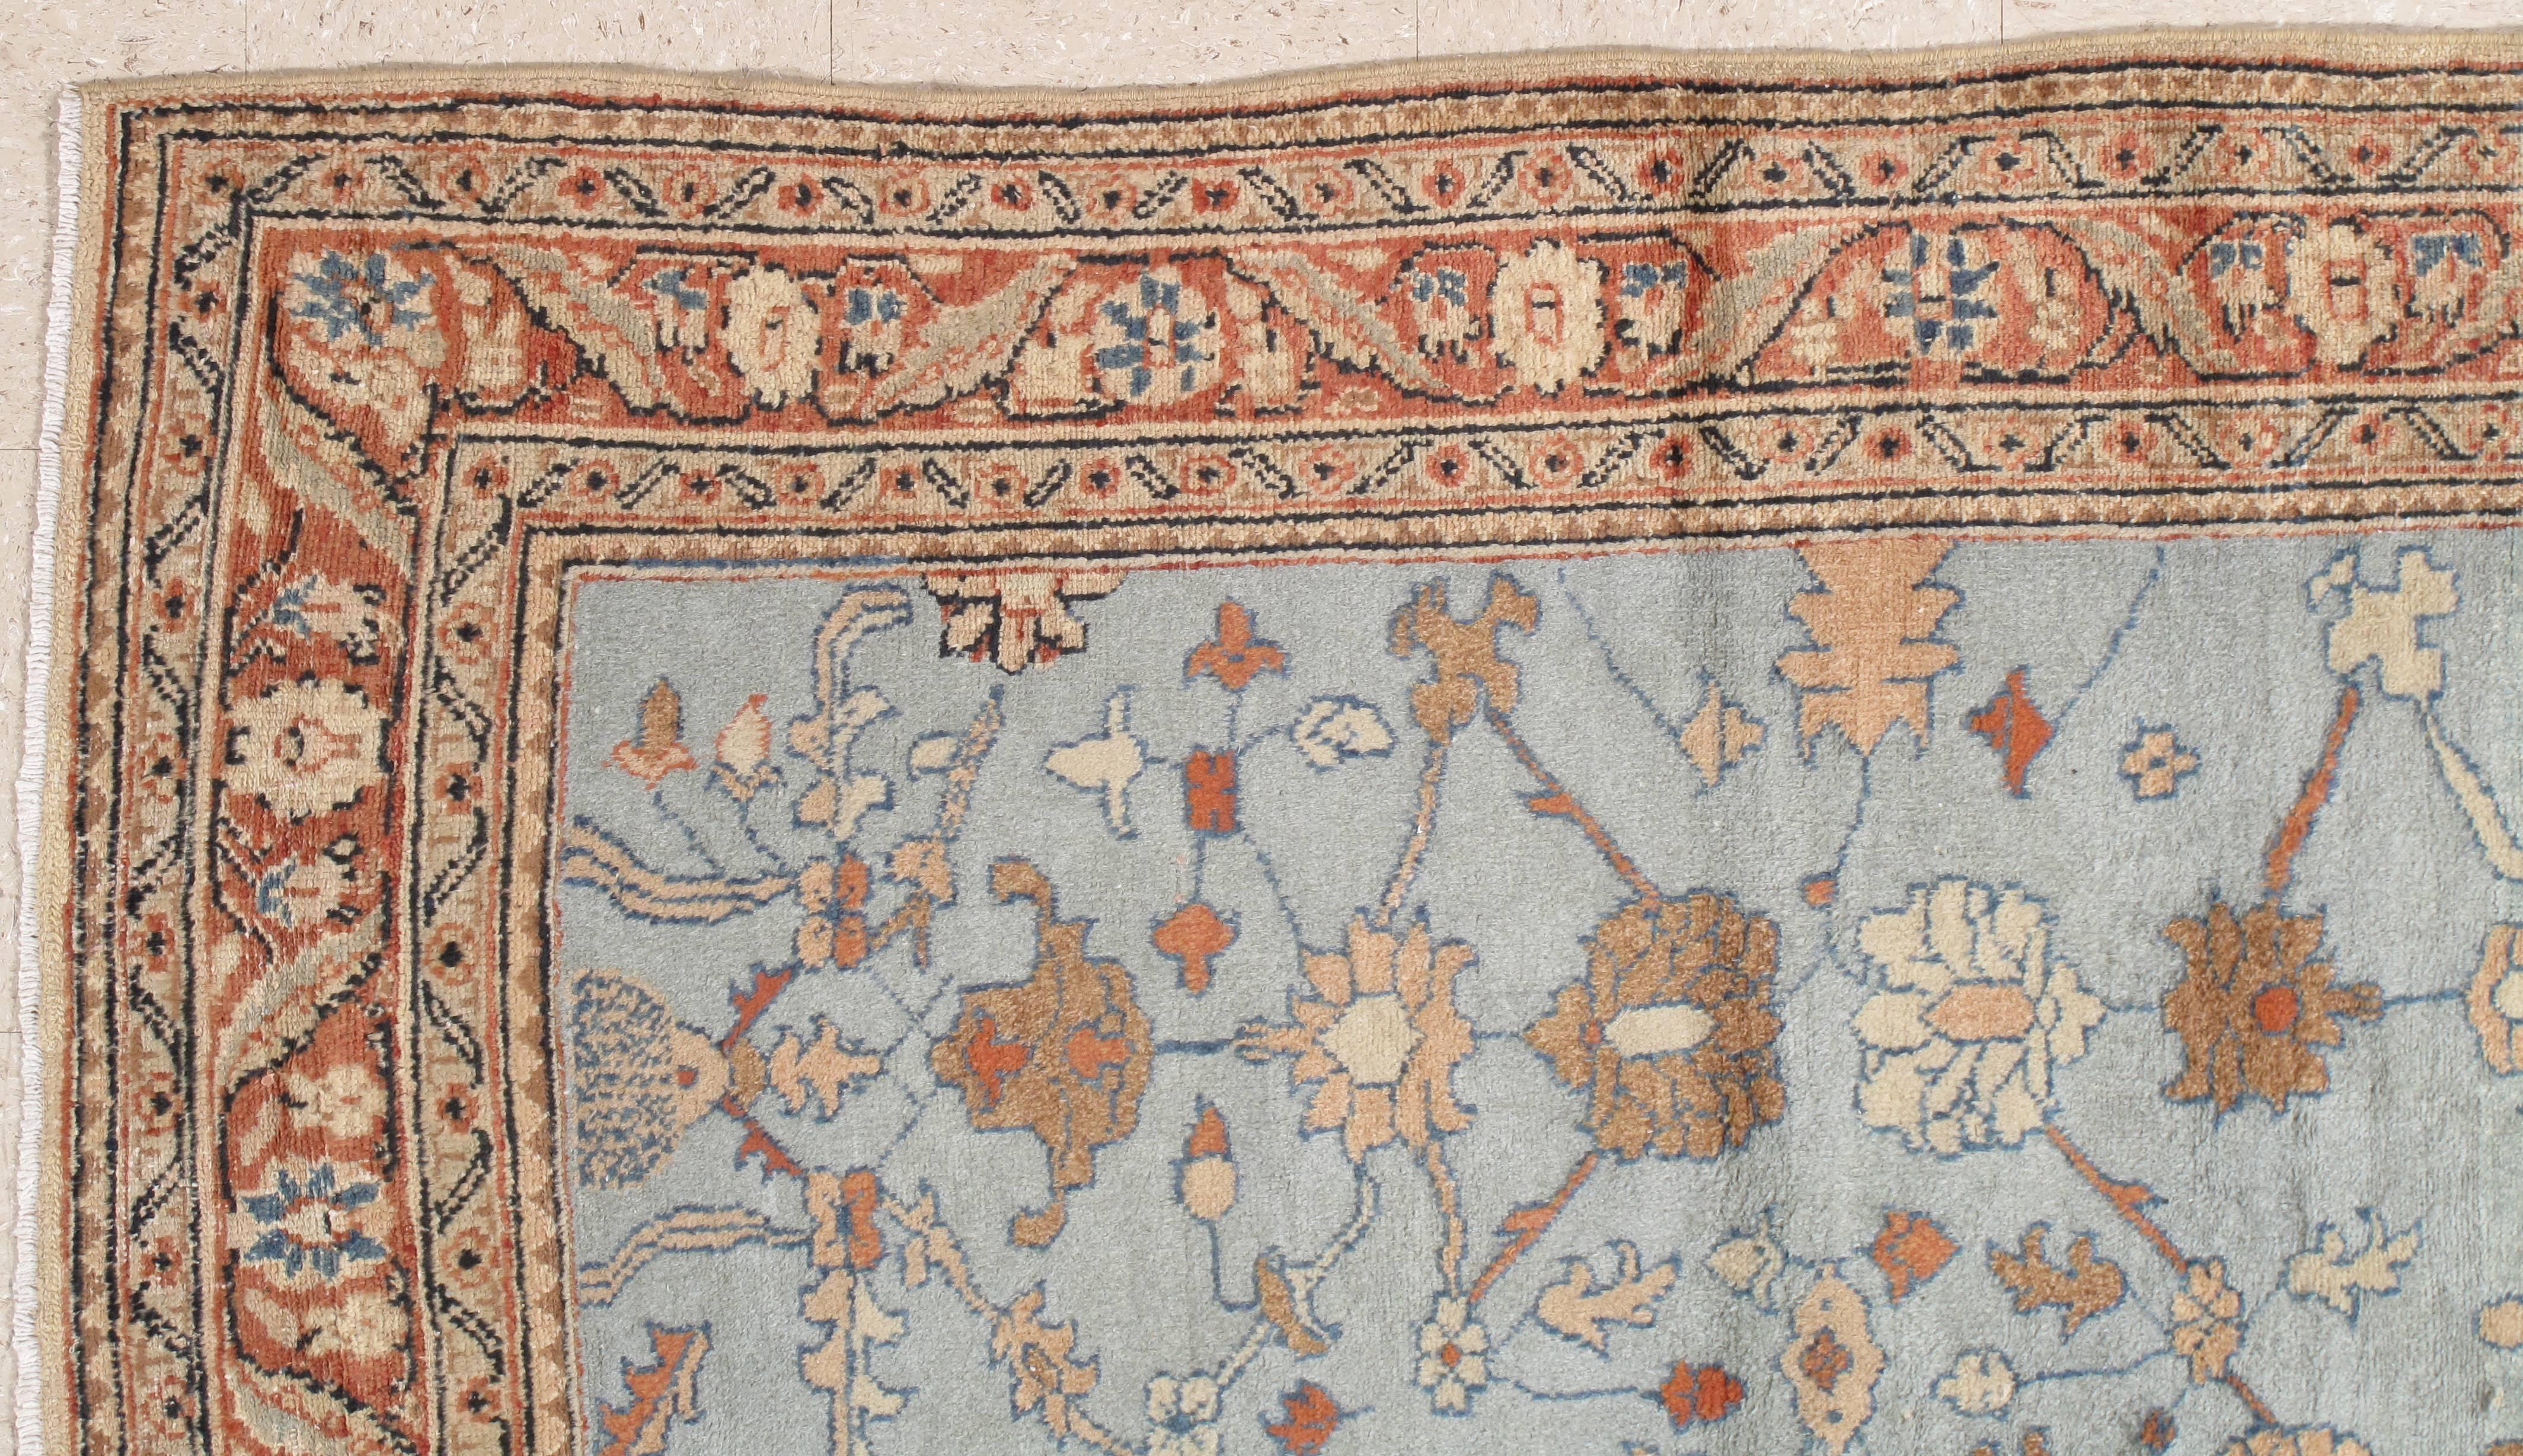 Mahal is a region in NW Persia. Mahal's just like Sultanabads are famous for their floral designs as they improved the quality and designs to match the European taste. Adapting the traditional patterns for use in European and American homes. Size: